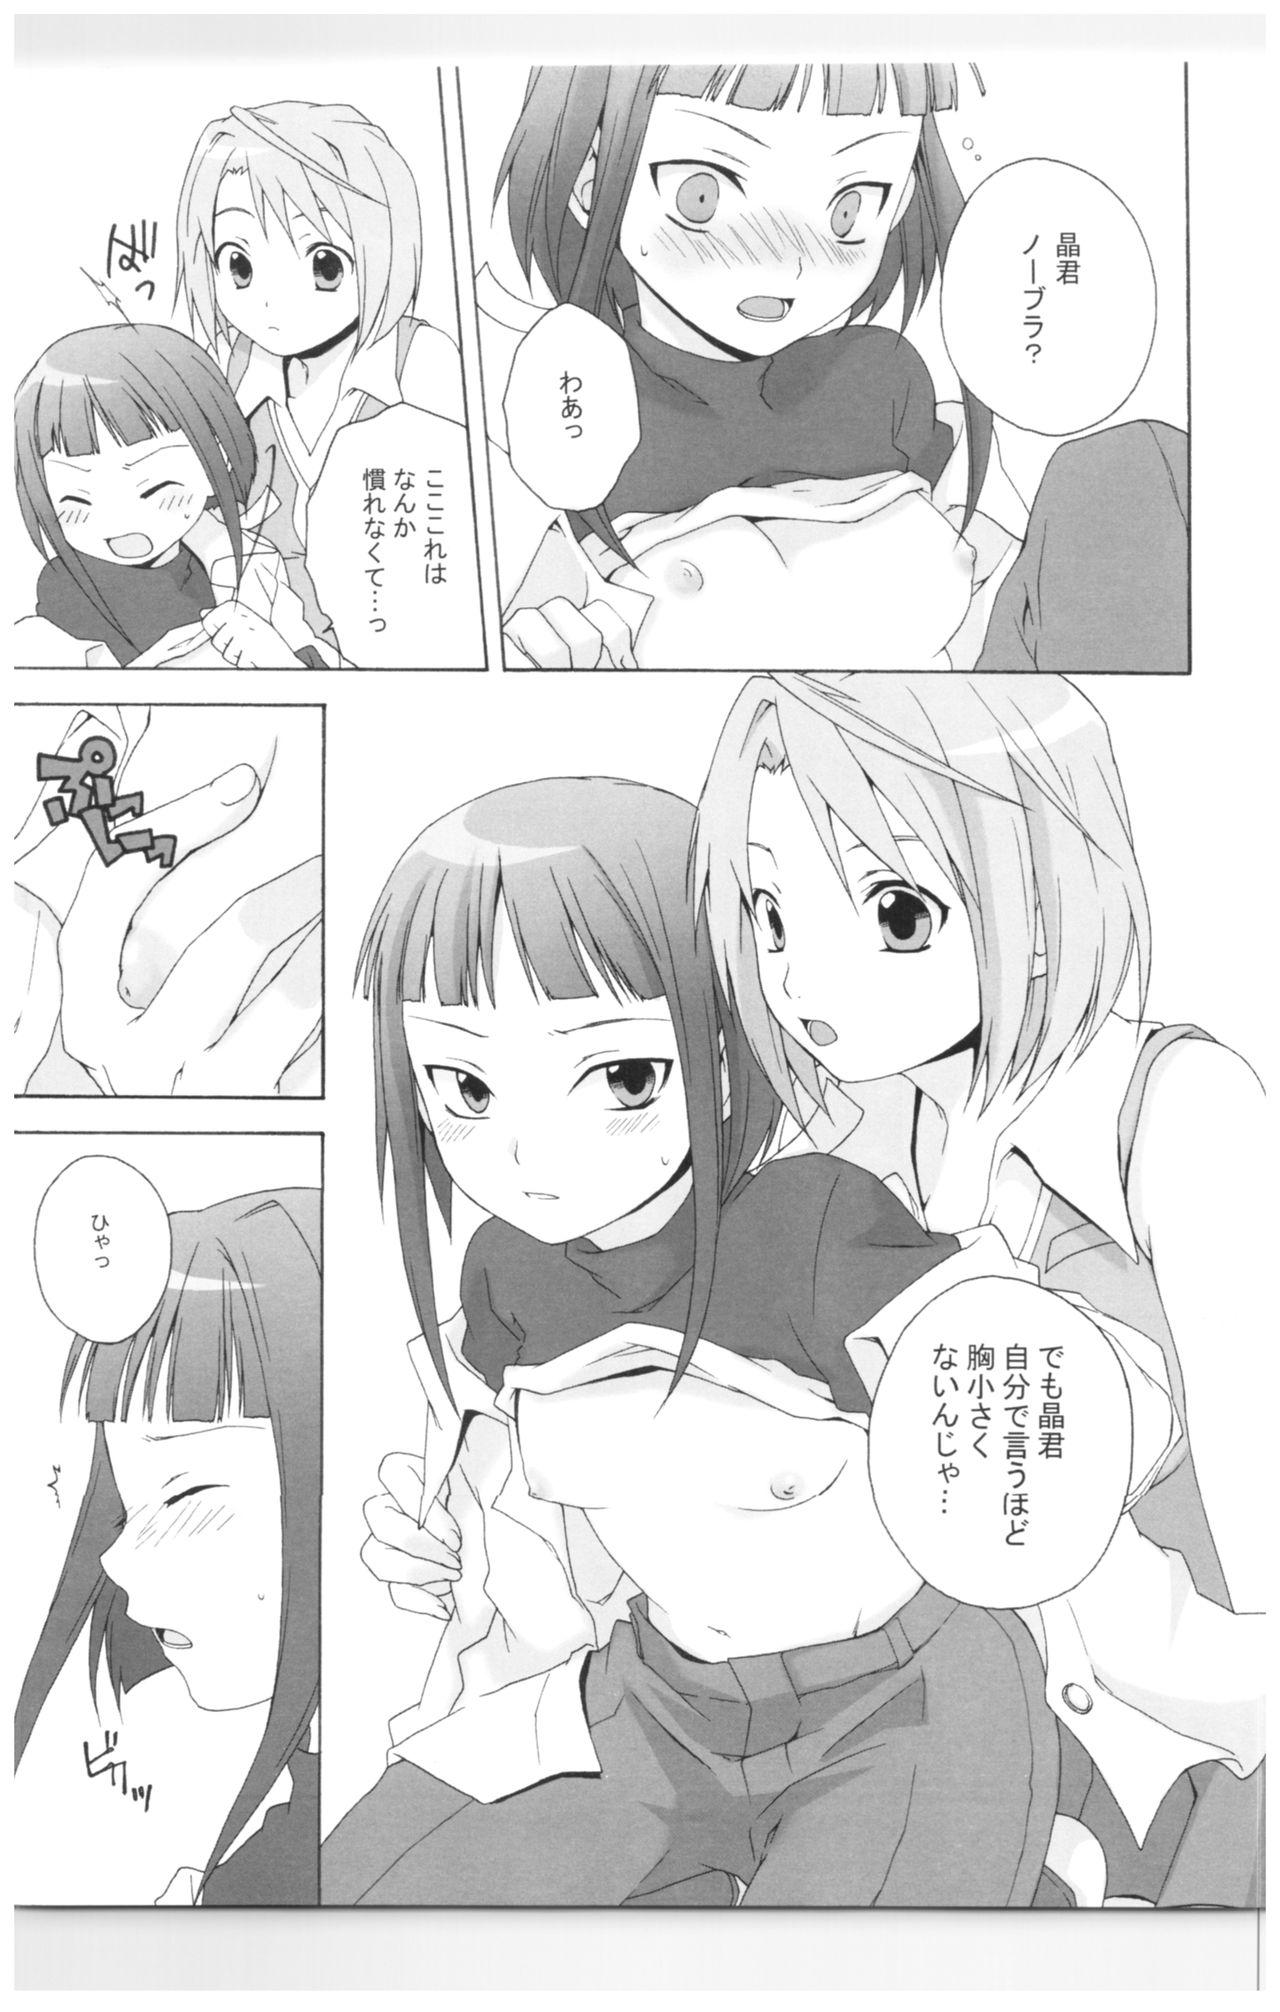 Slapping A/T - Mai hime Speculum - Page 12